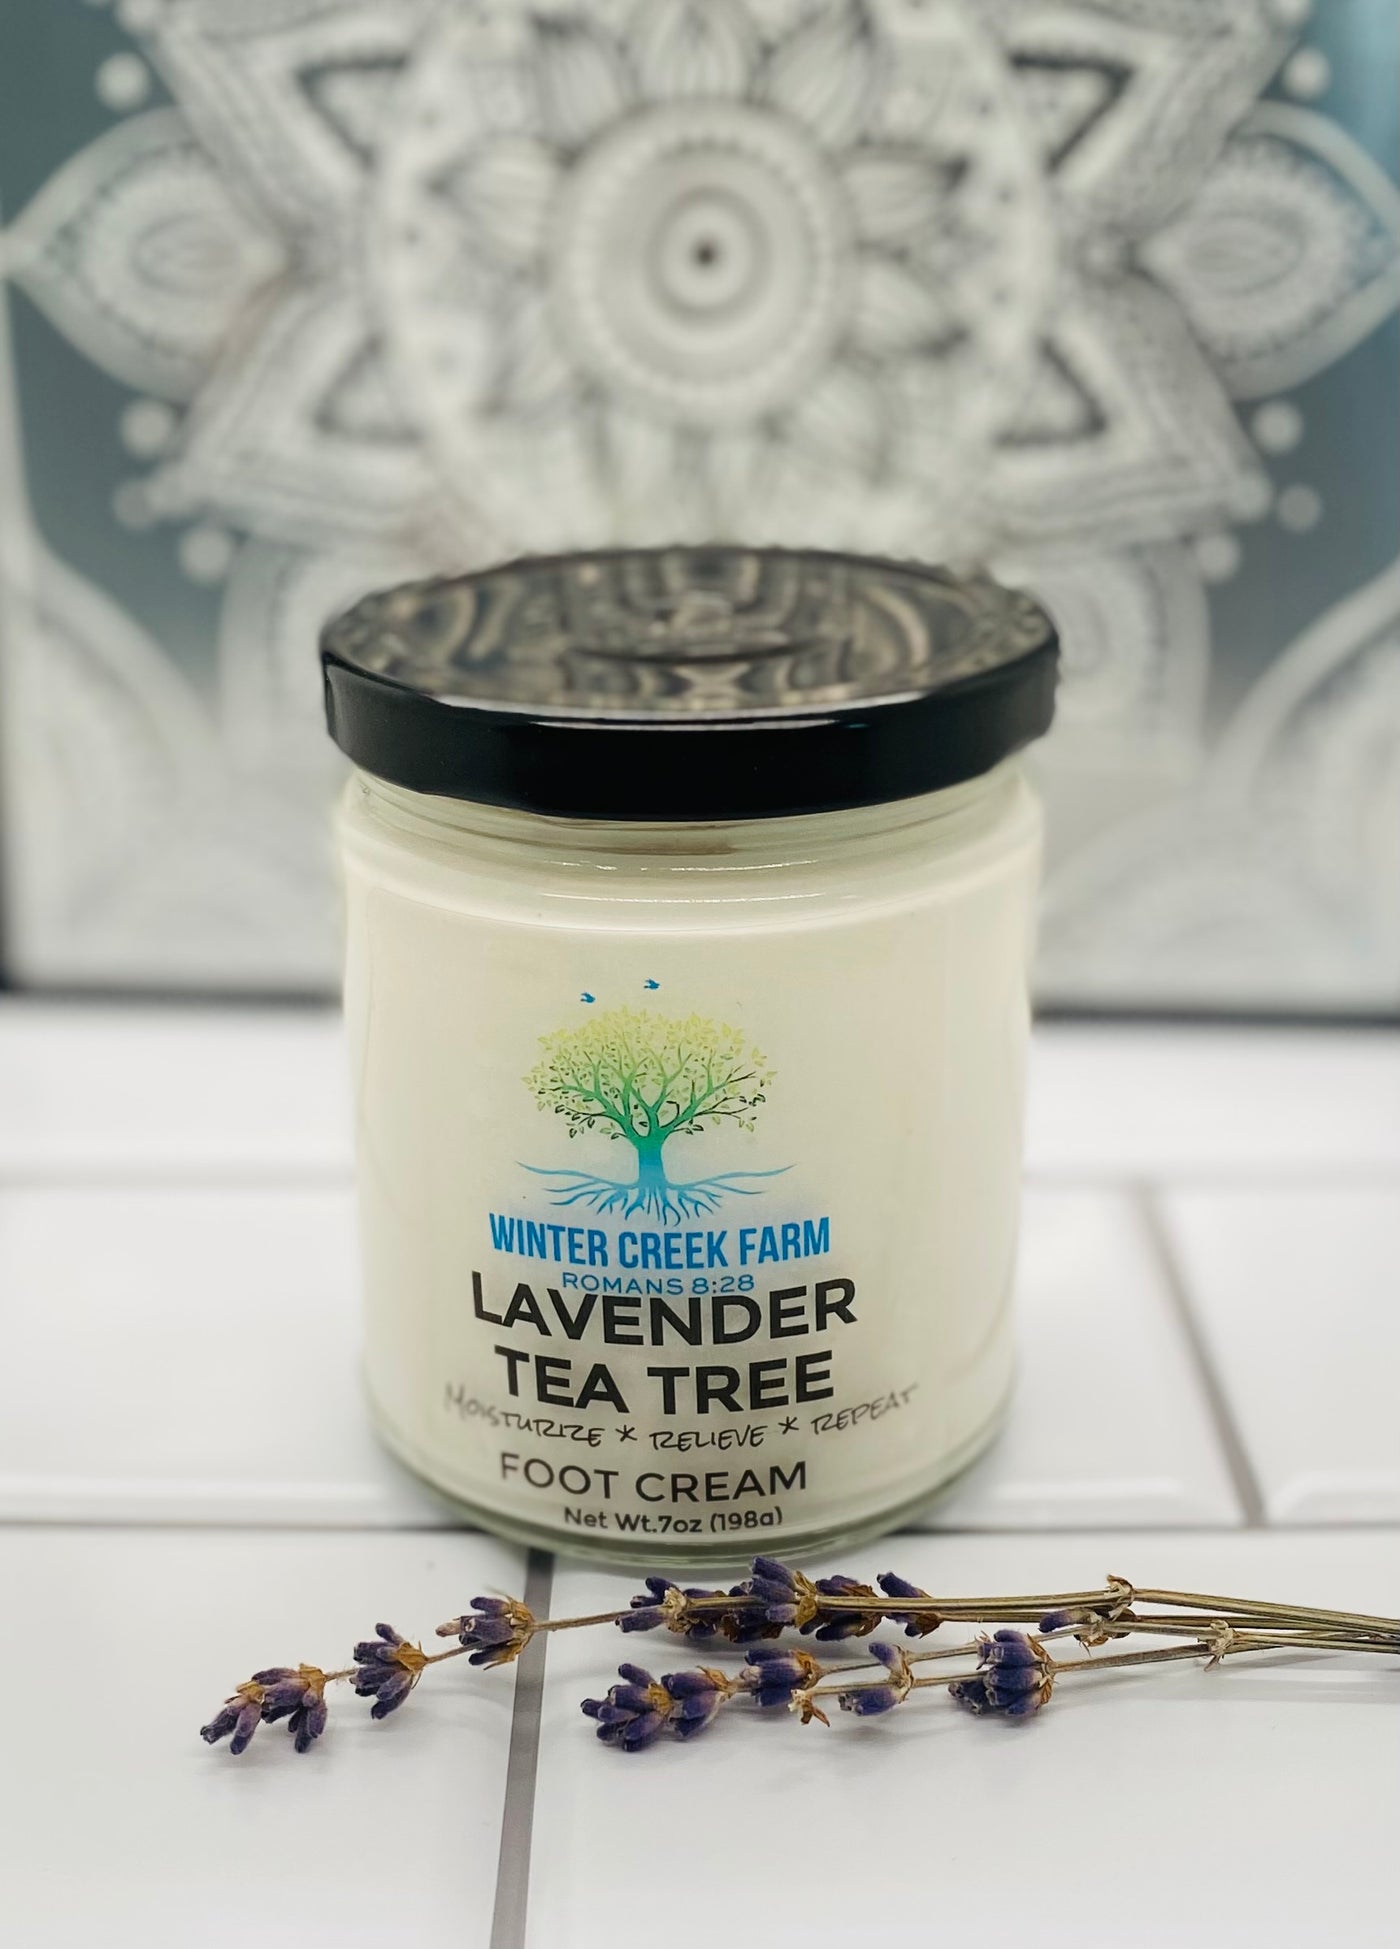 Lavender Tea Tree Foot Cream | Mango Butter | Menthol | Essential Oils | Natural Oils and Butters | Handmade | Self Care Gift